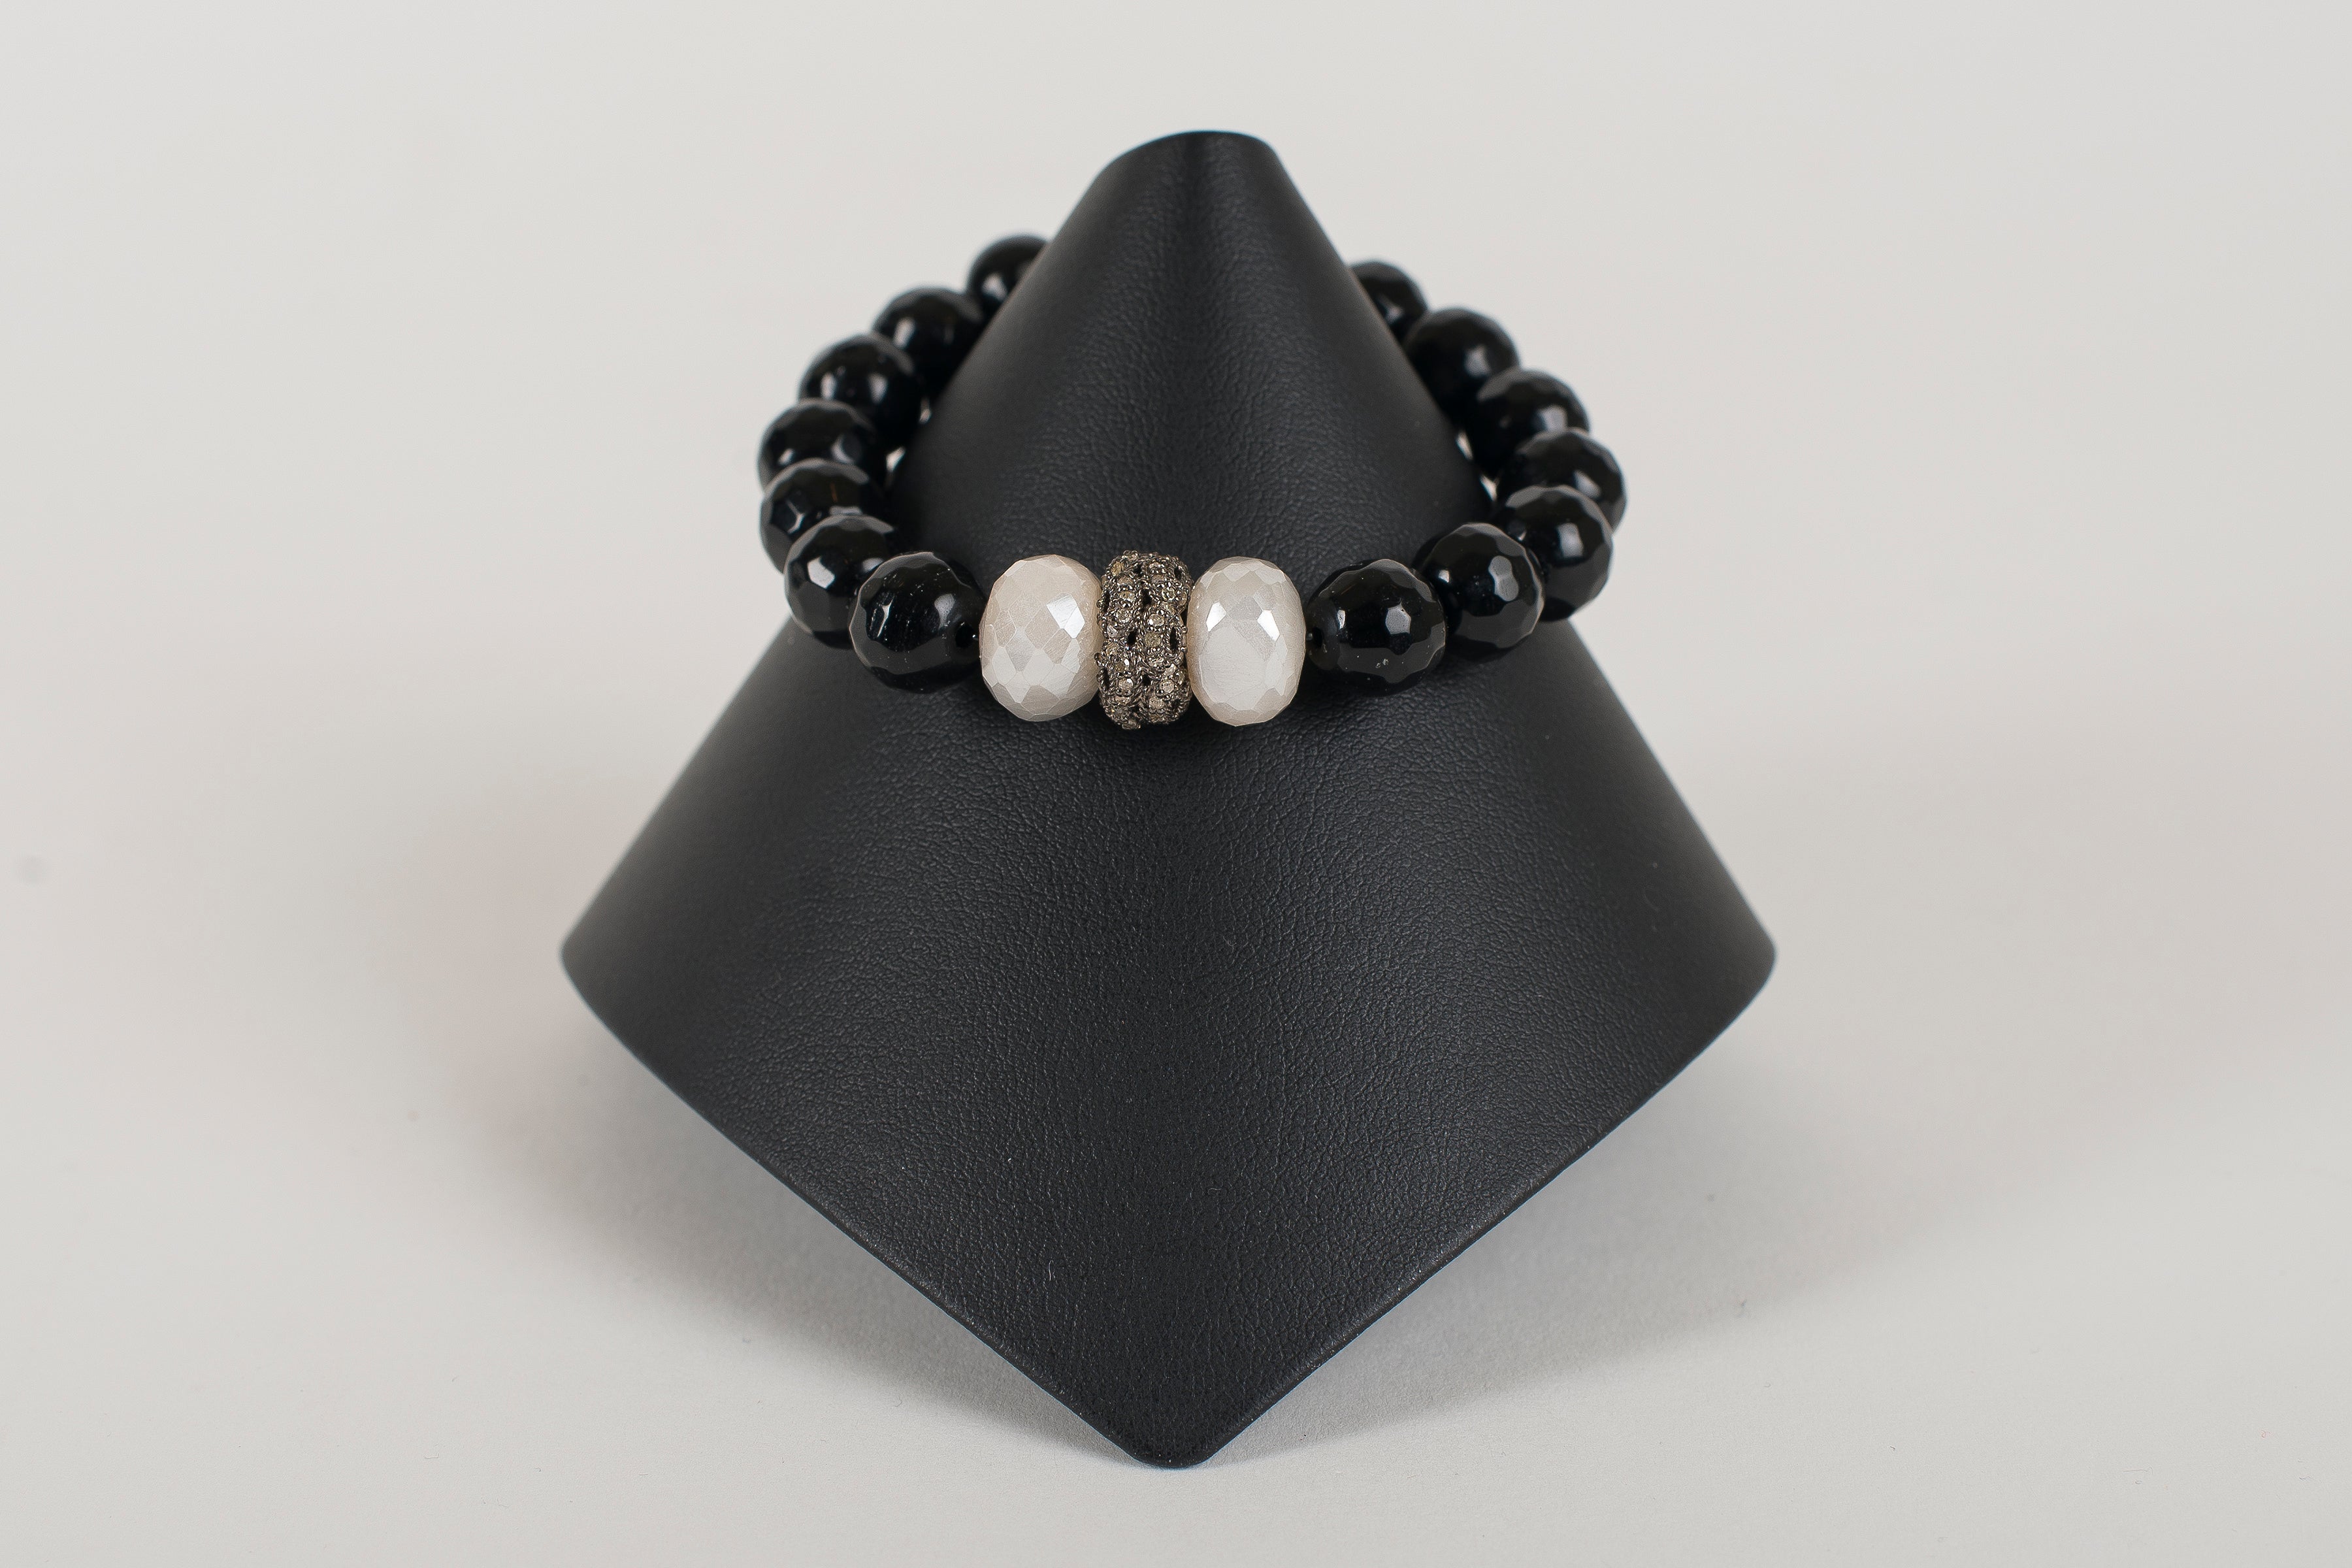 Black Onyx and Moonstone with Pave Diamond and Rondelle